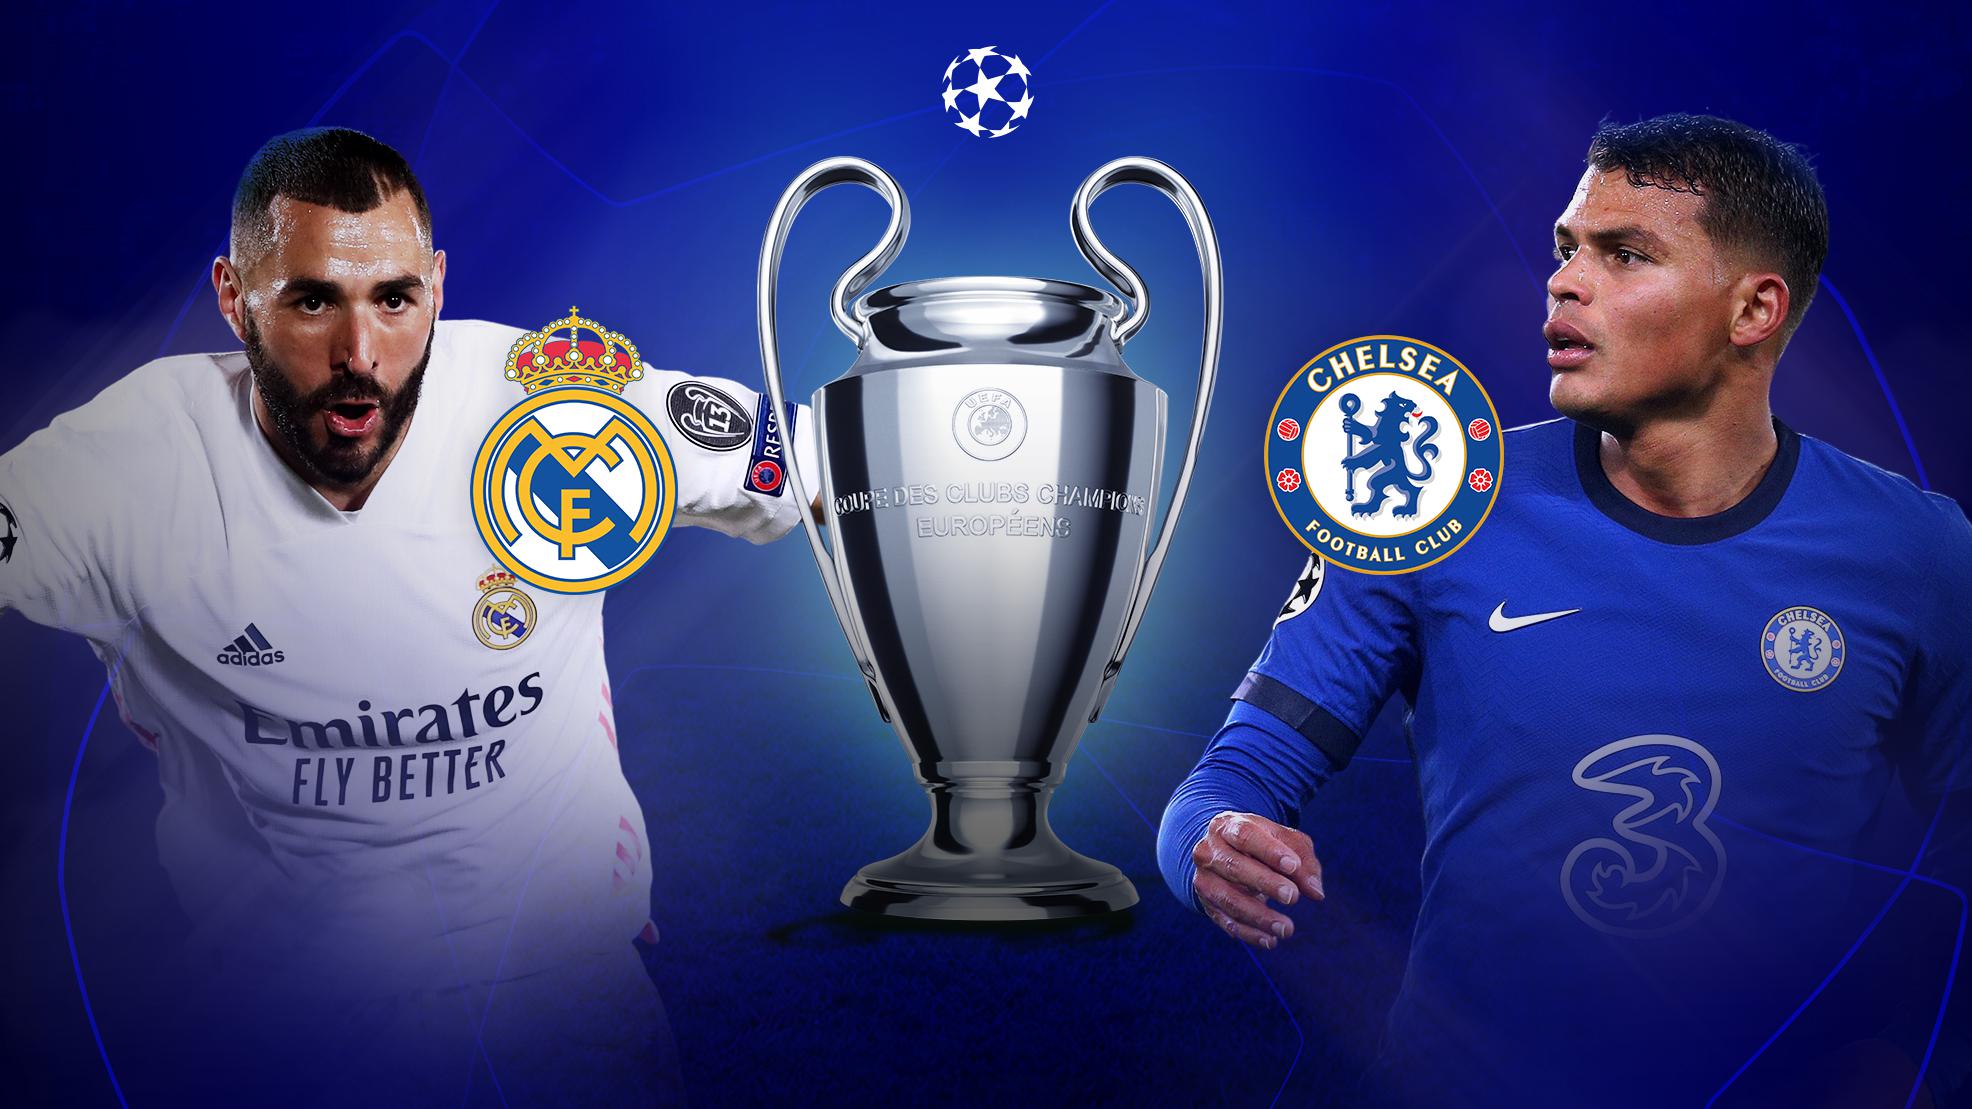 Real Madrid vs Chelsea Champions League preview: where to watch, line-ups, team news | UEFA Champions League | UEFA.com